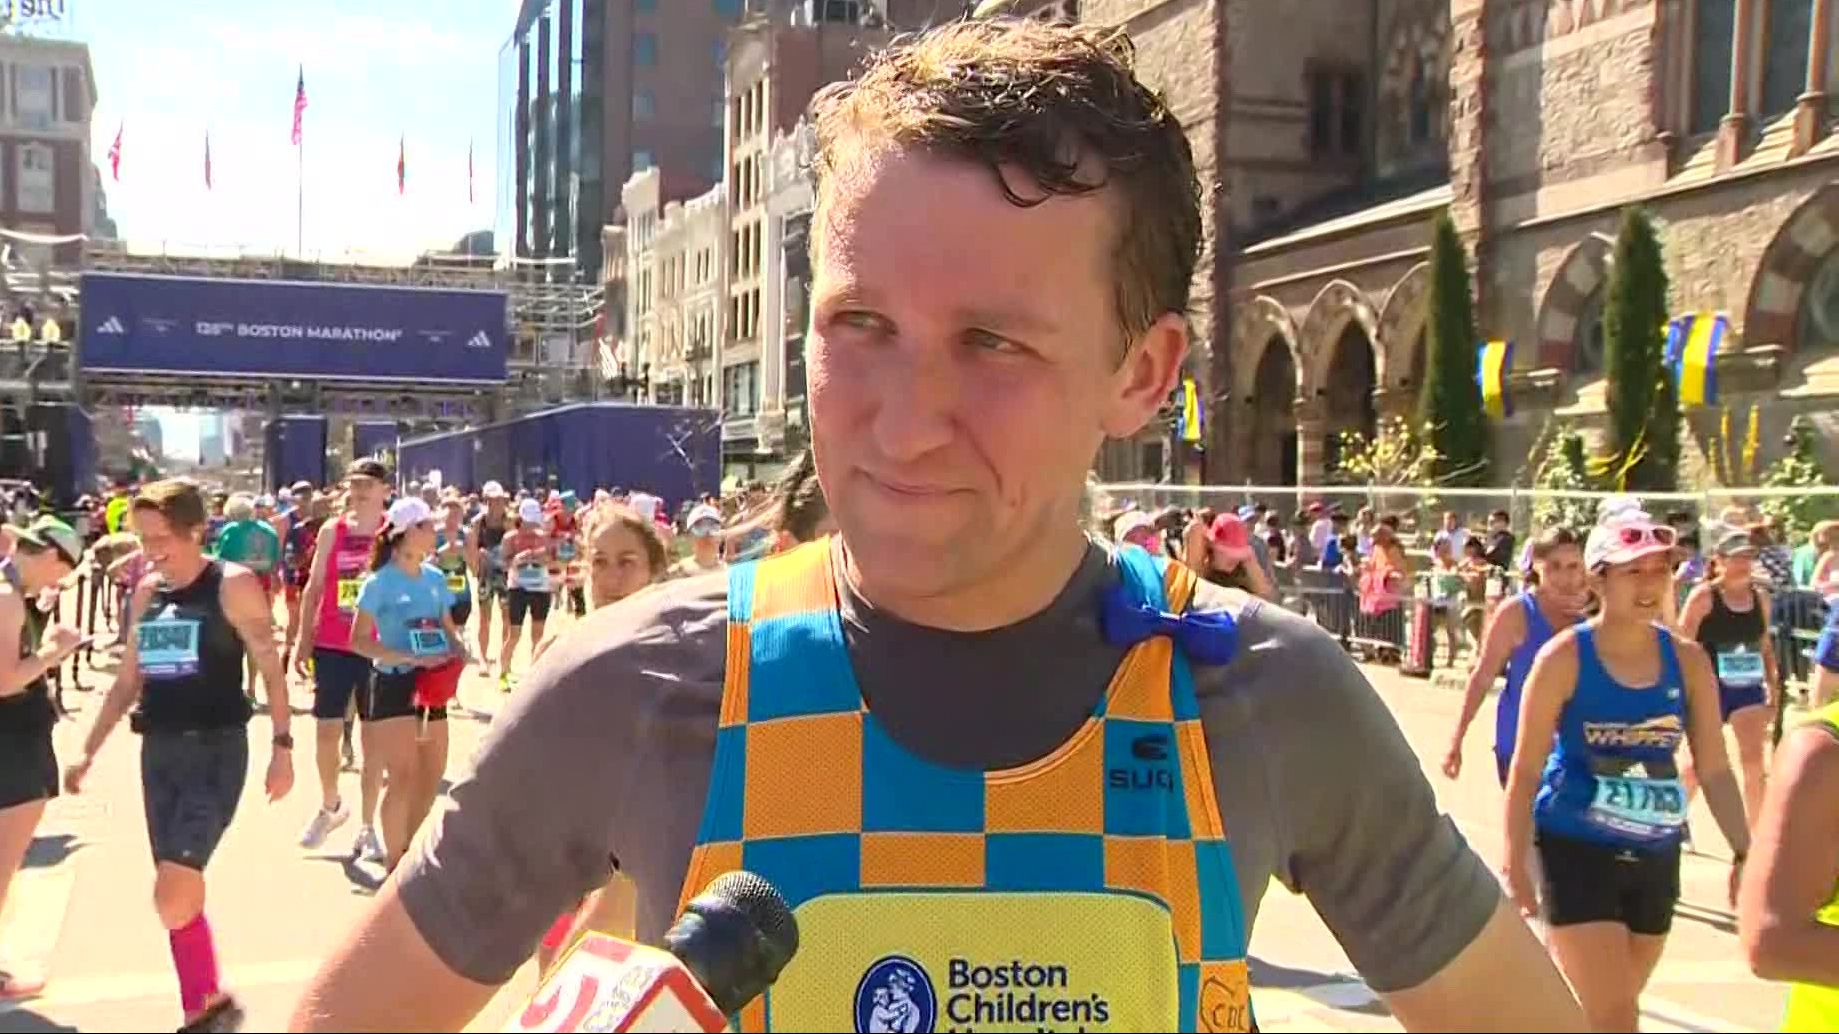 Father who lost 3 children finishes Boston Marathon, wearing items from his kids